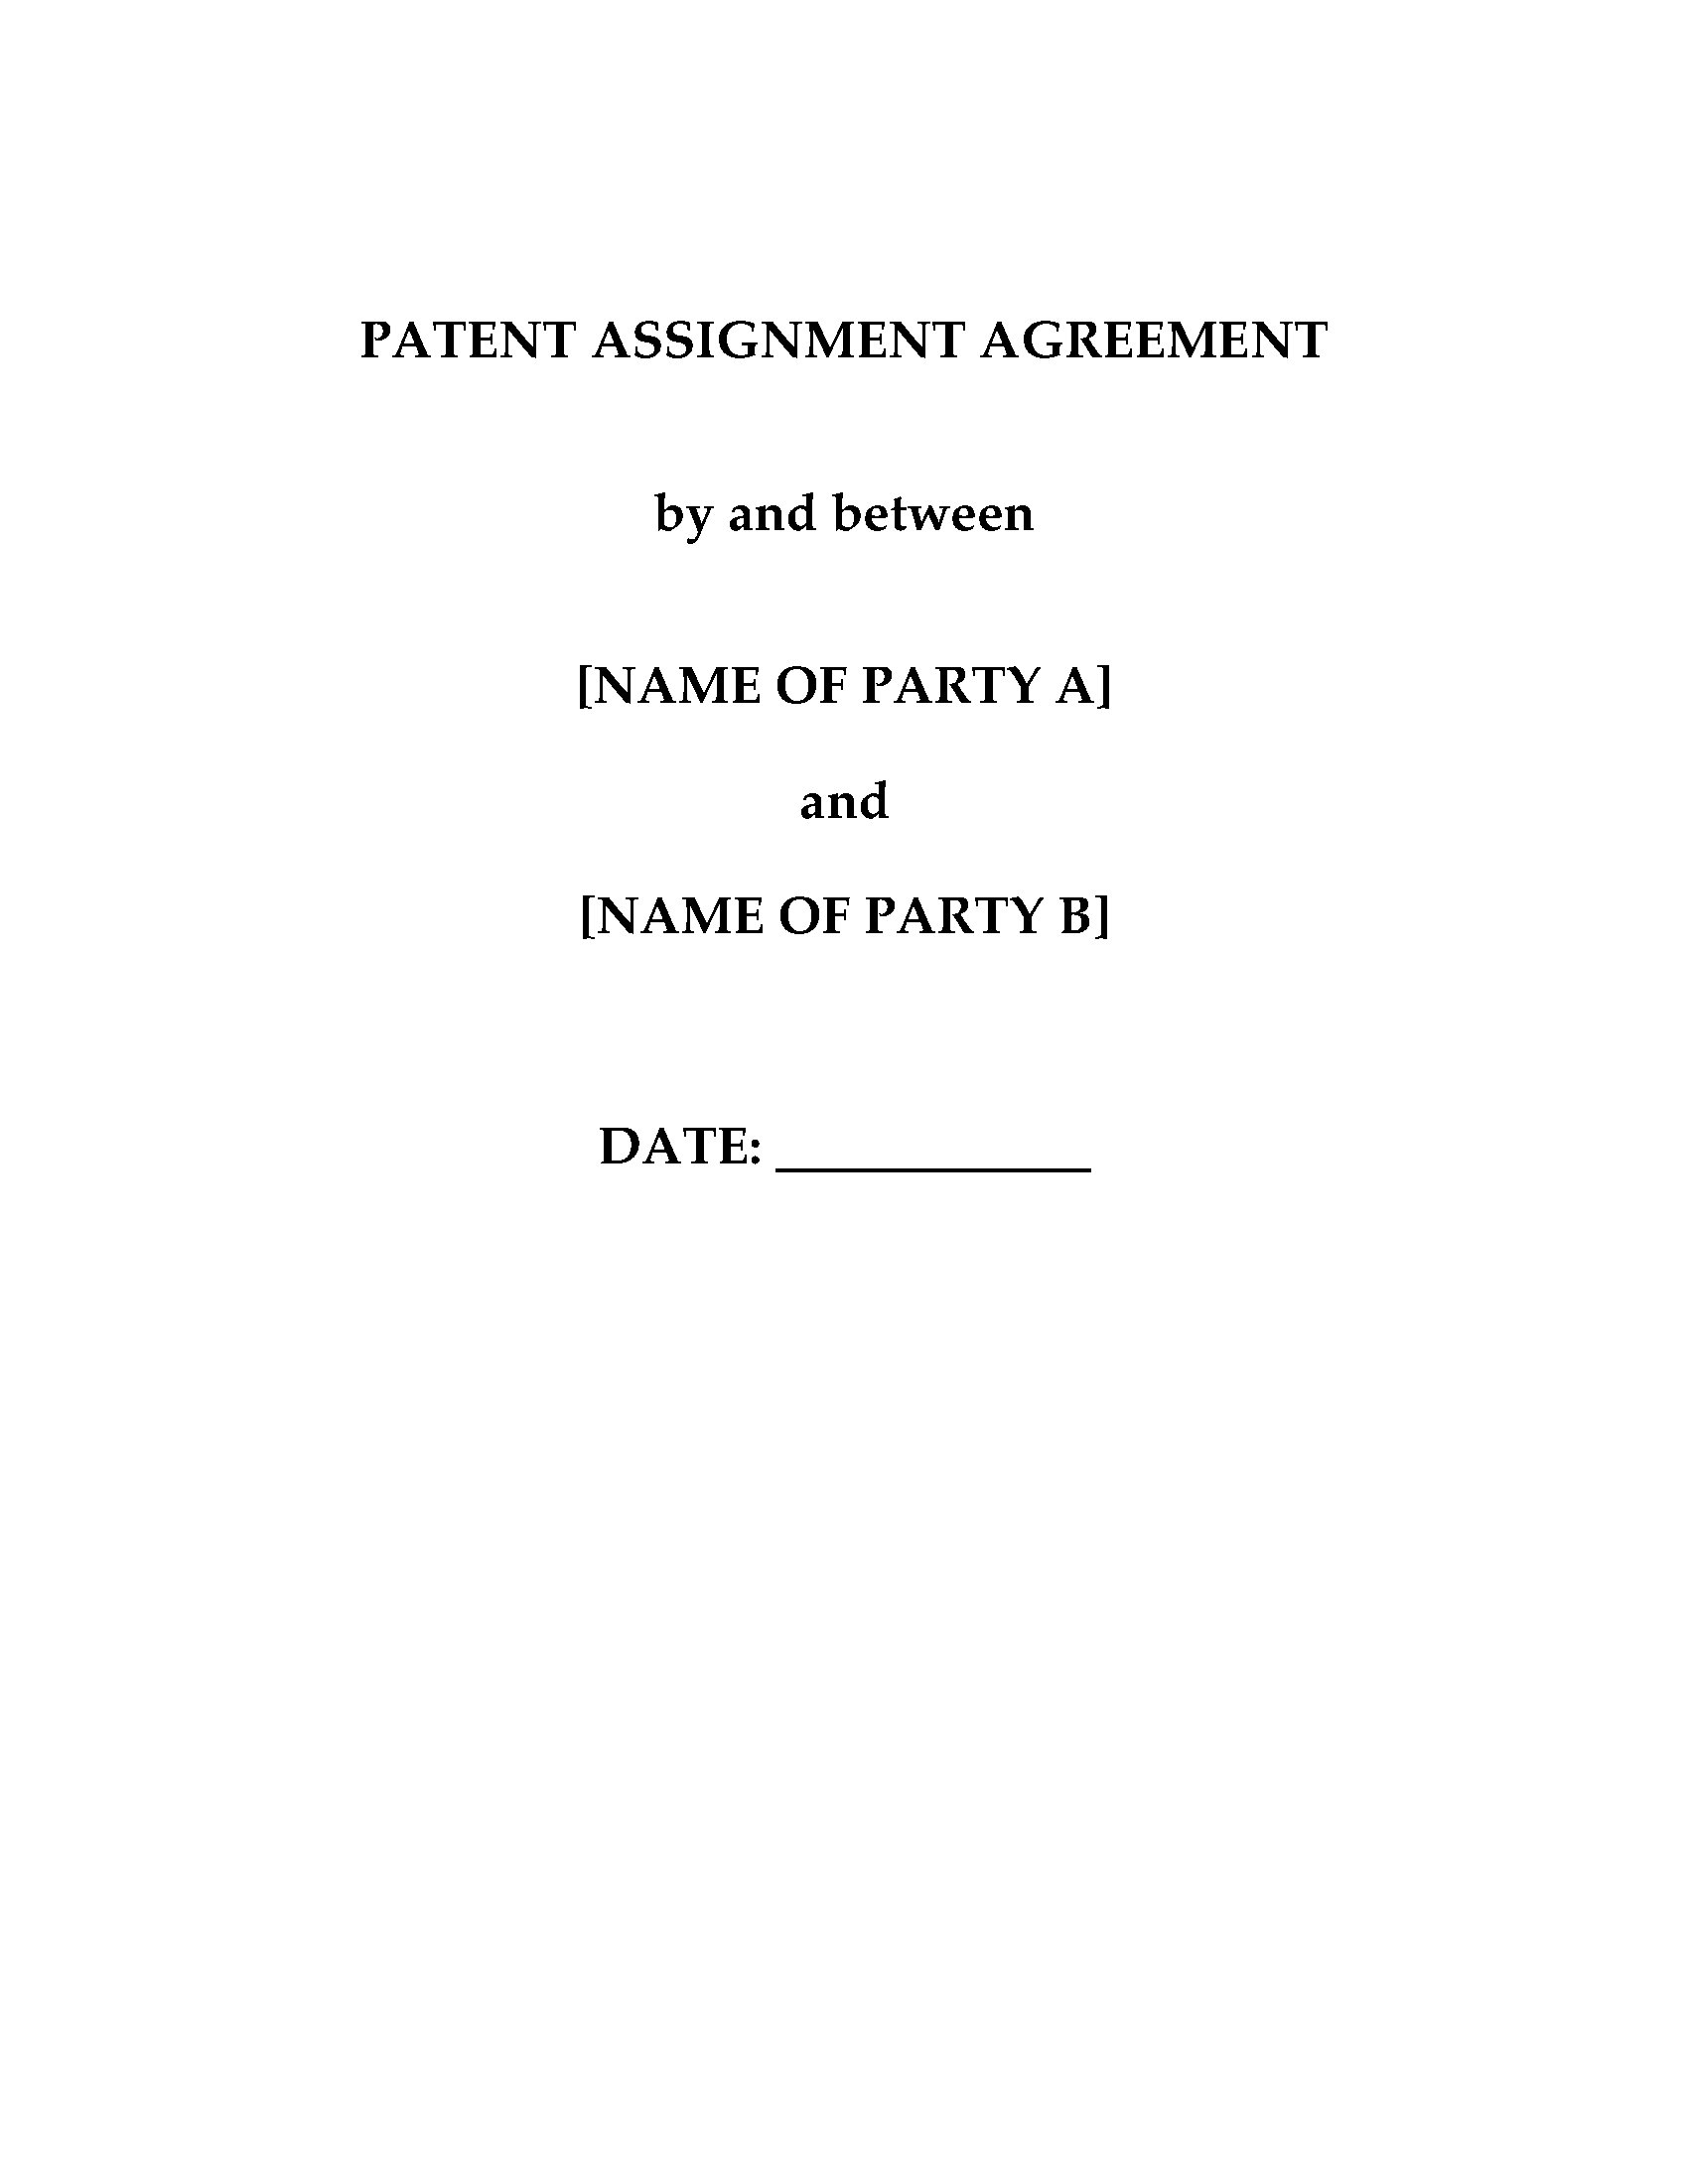 china patent assignment requirements